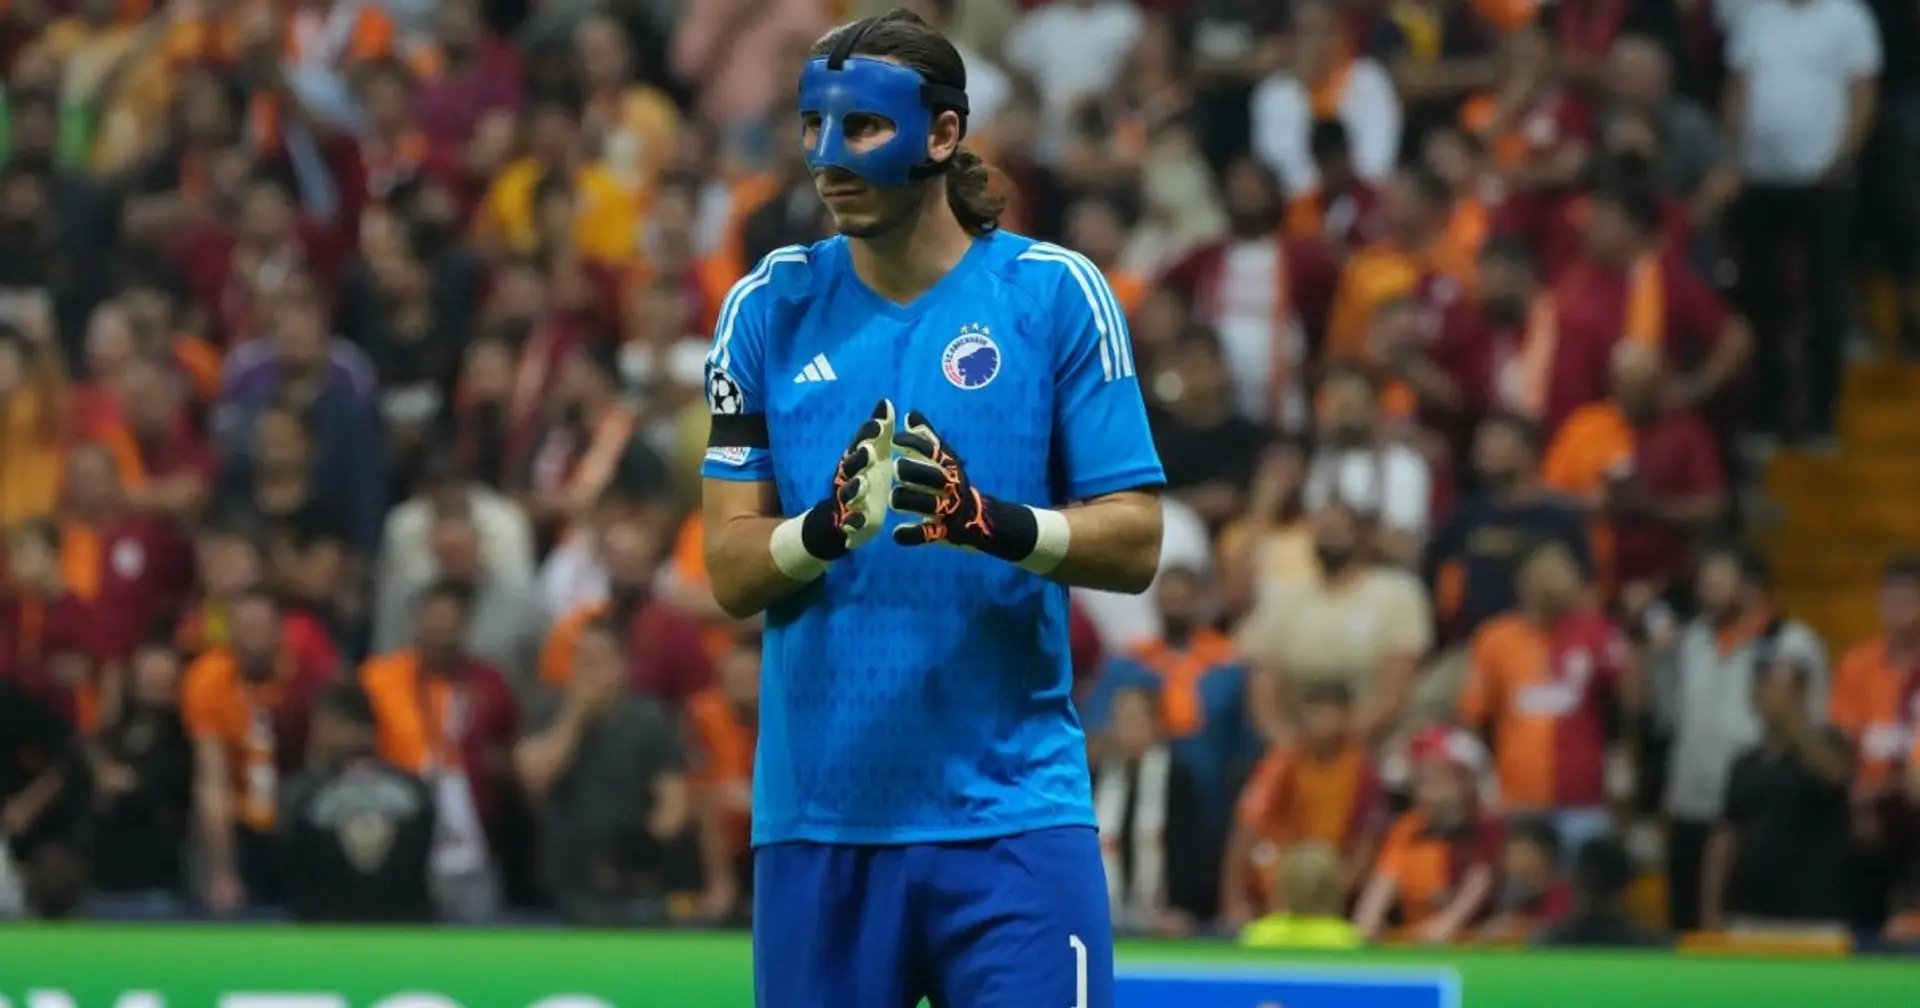 Why Turkish fans send ex-Liverpool goalkeeper death threats - explained